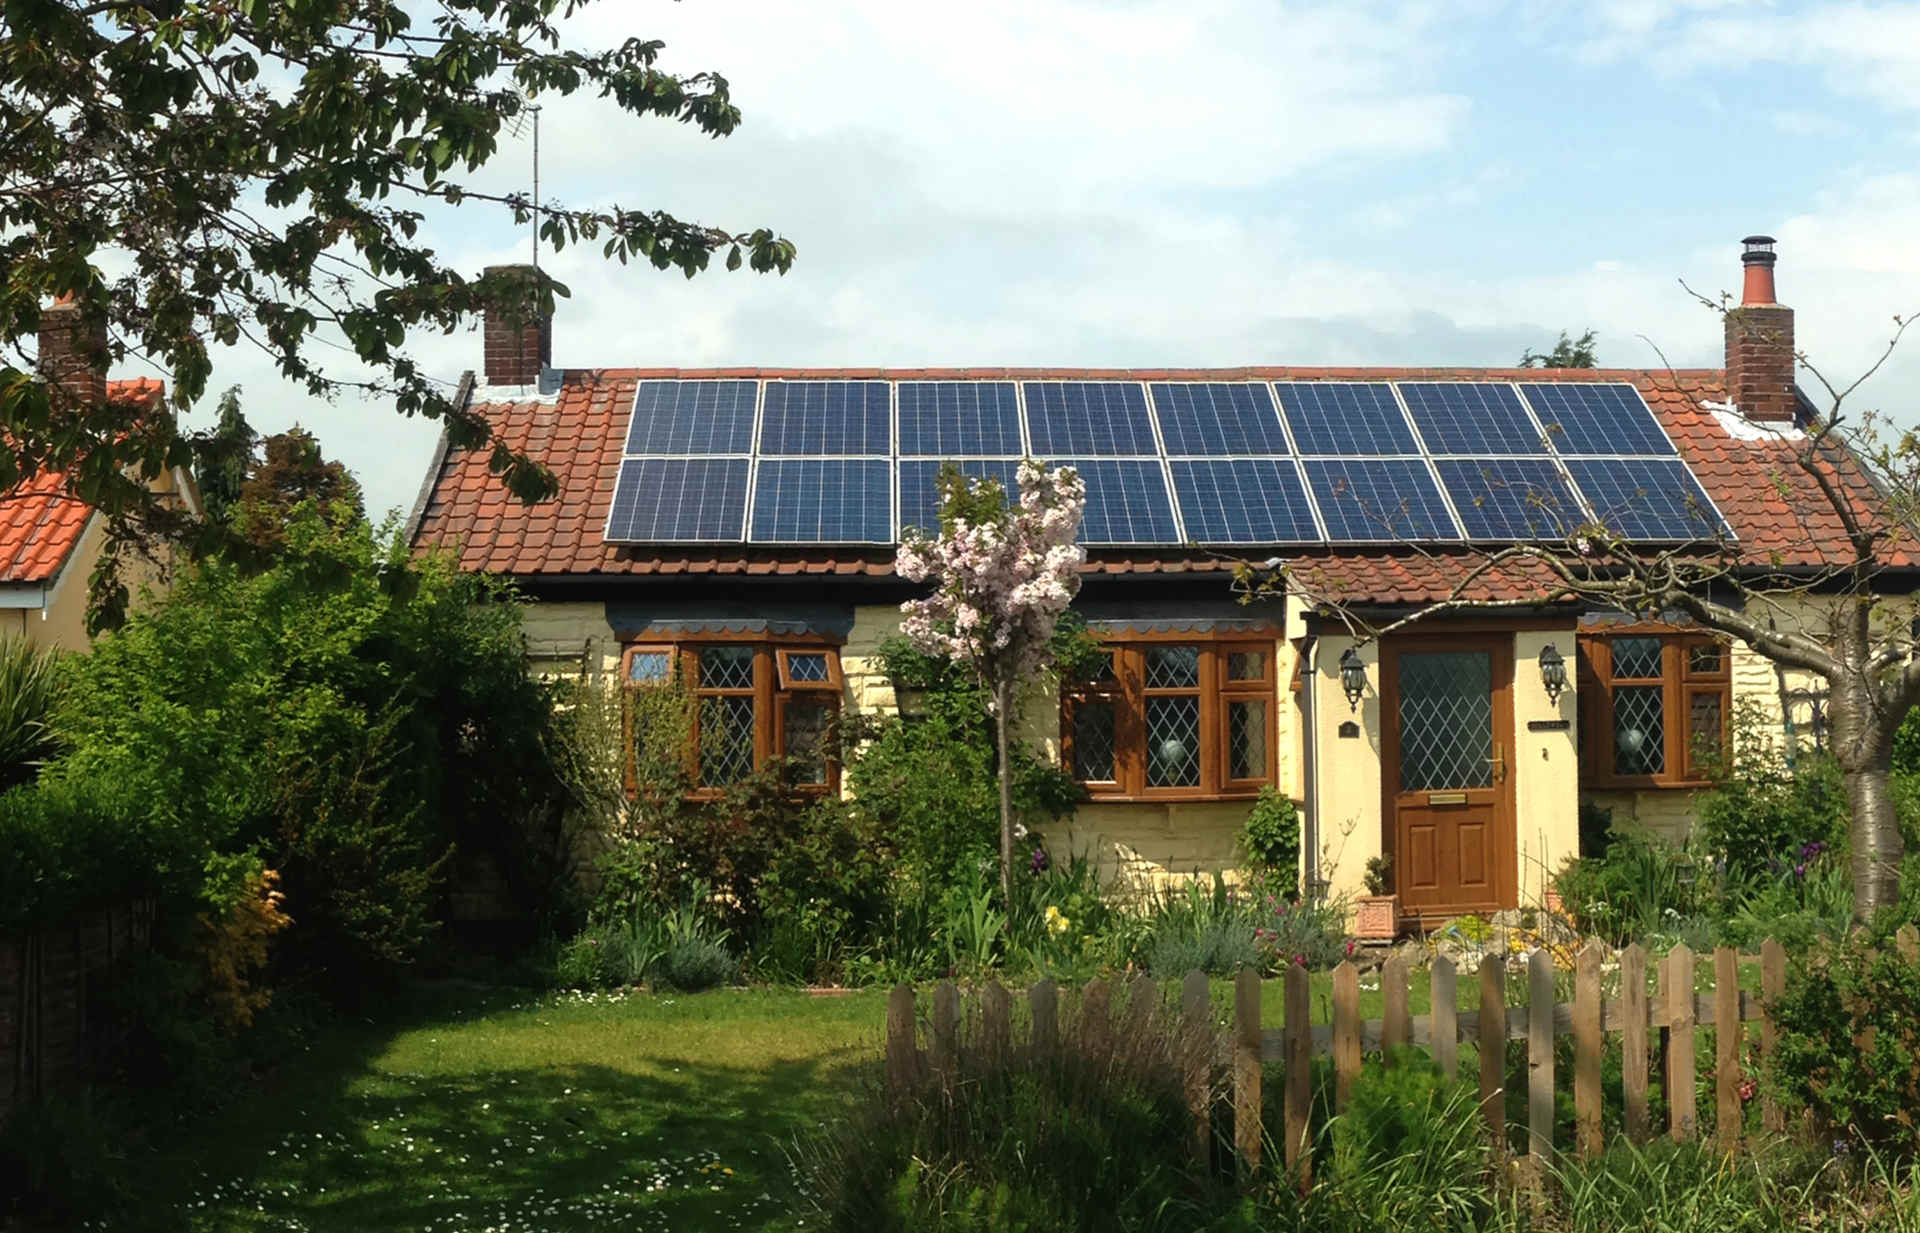 Solar panels on house to demonstrate the green grant